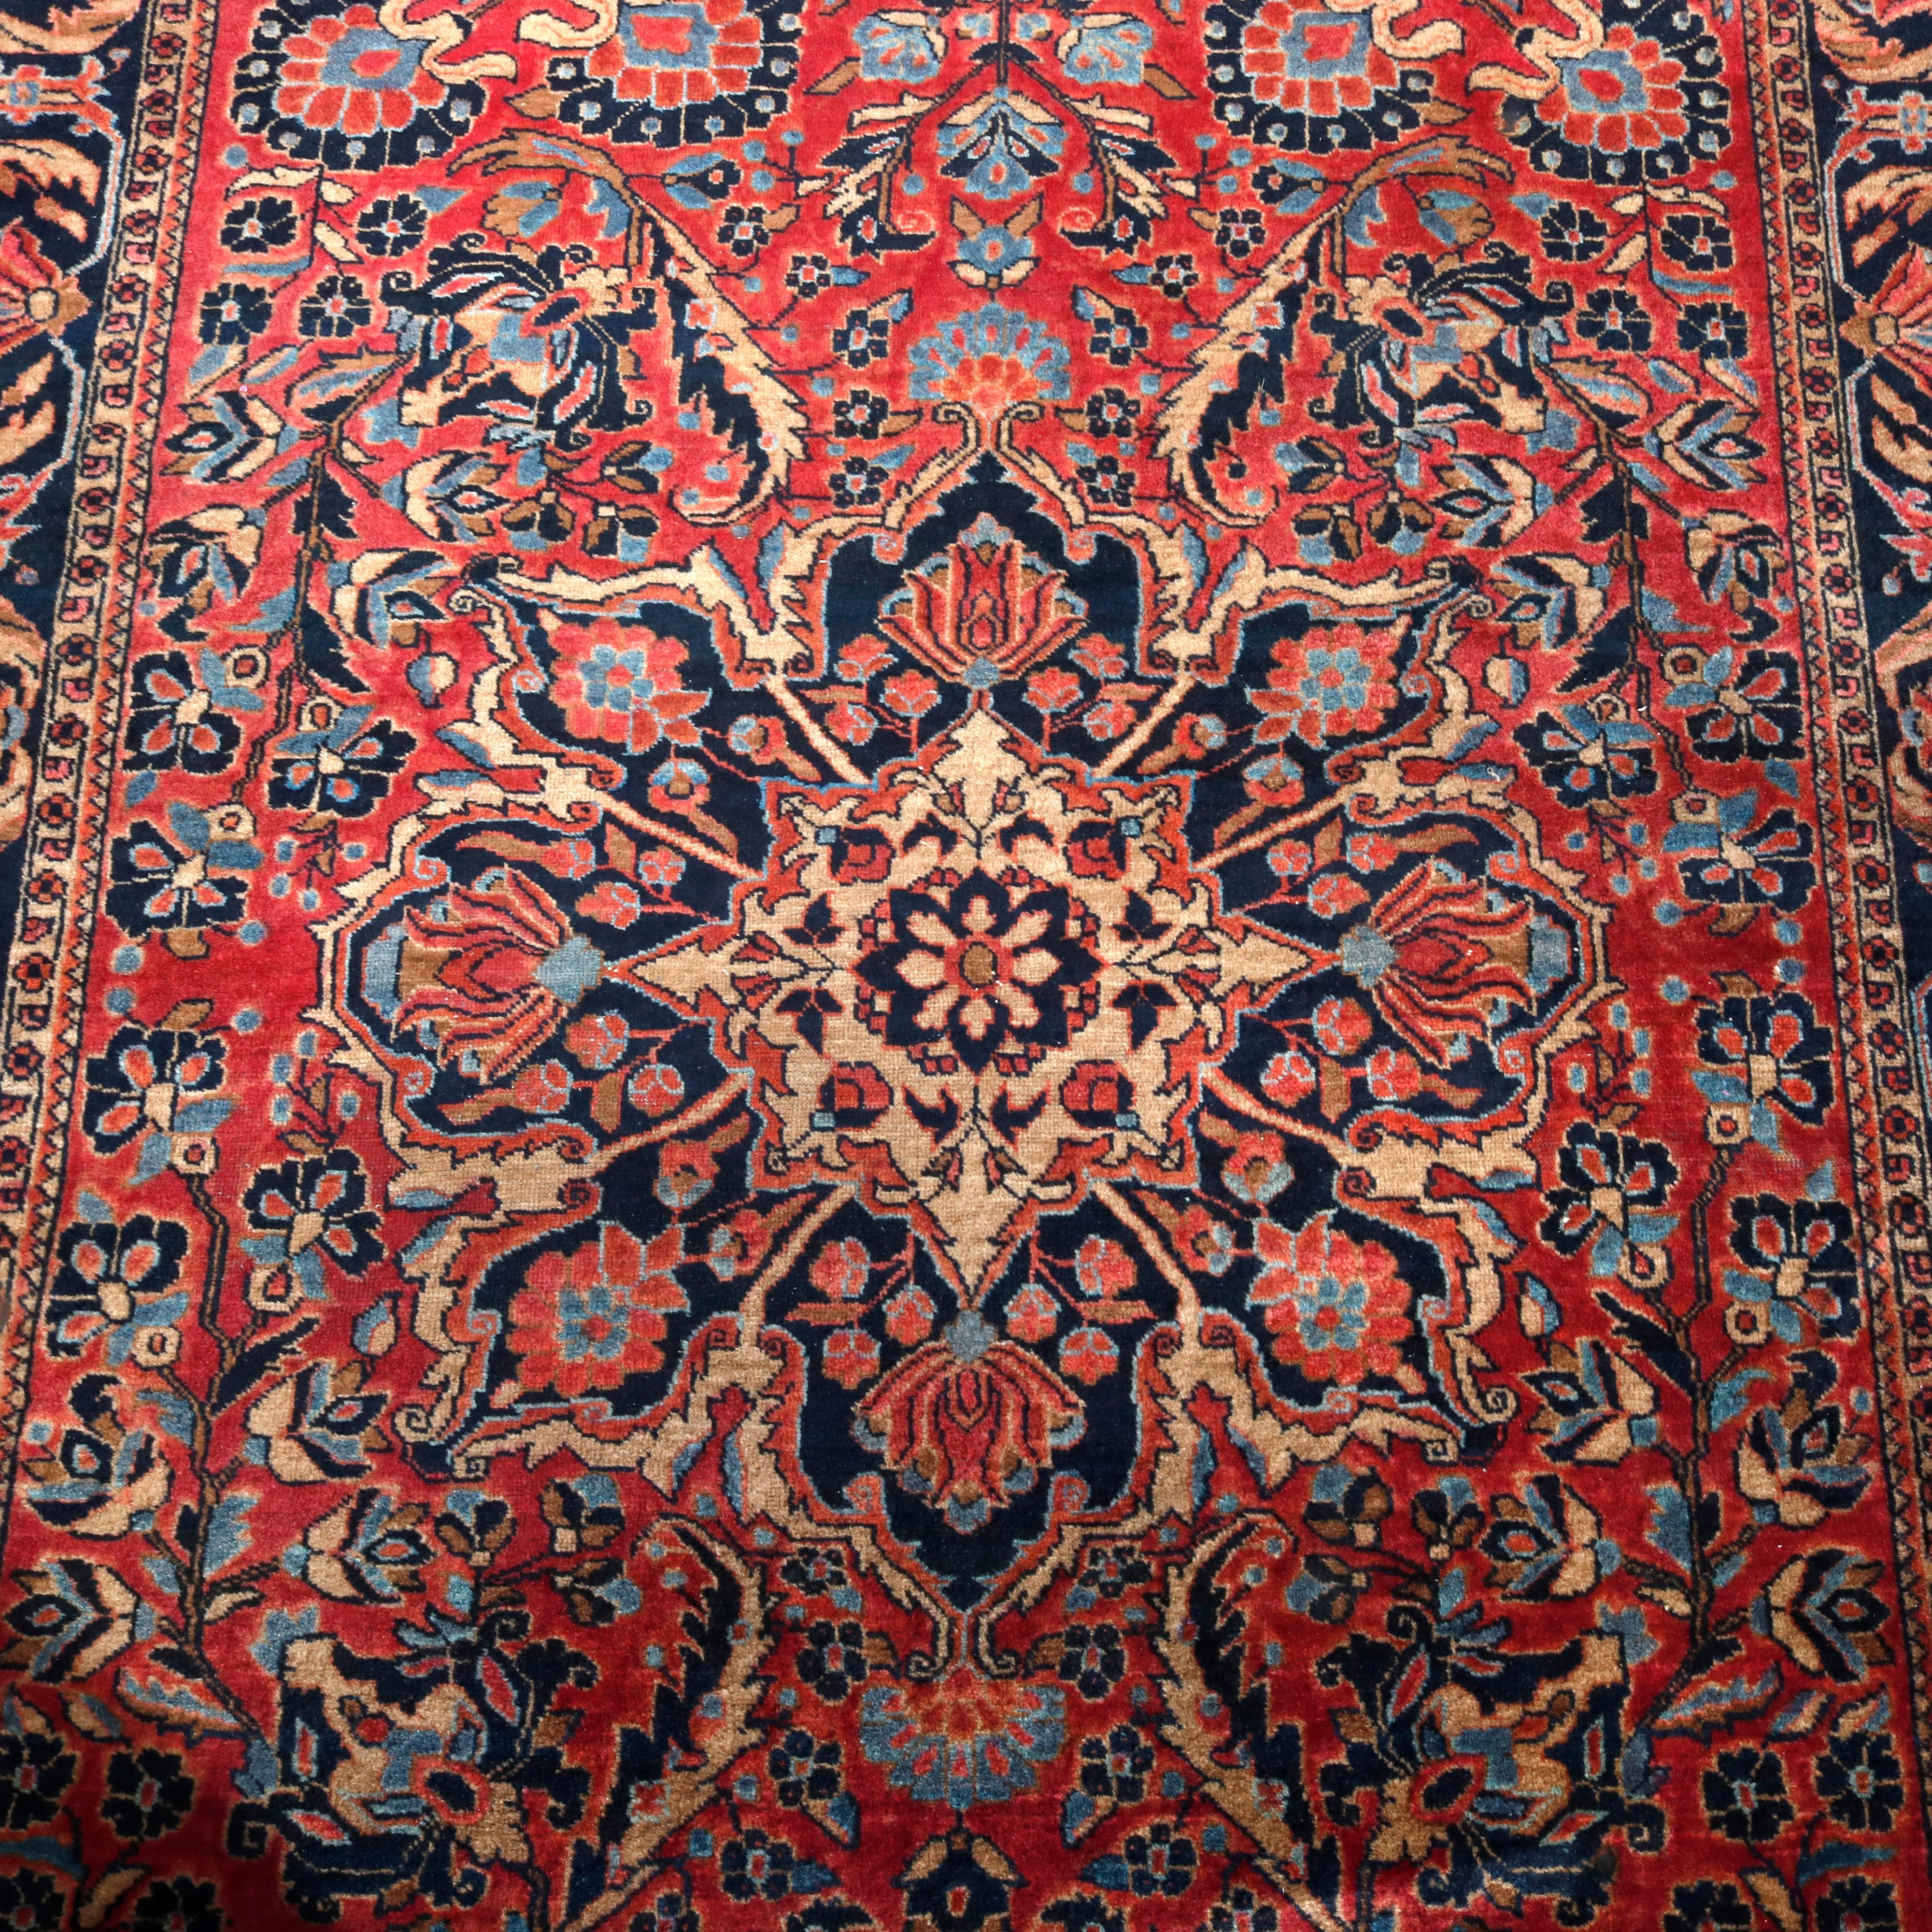 An antique Persian Sarouk oriental rug offers wool construction with central floral medallion and all-over floral and foliate design on red ground, circa 1920.

Measures: 81